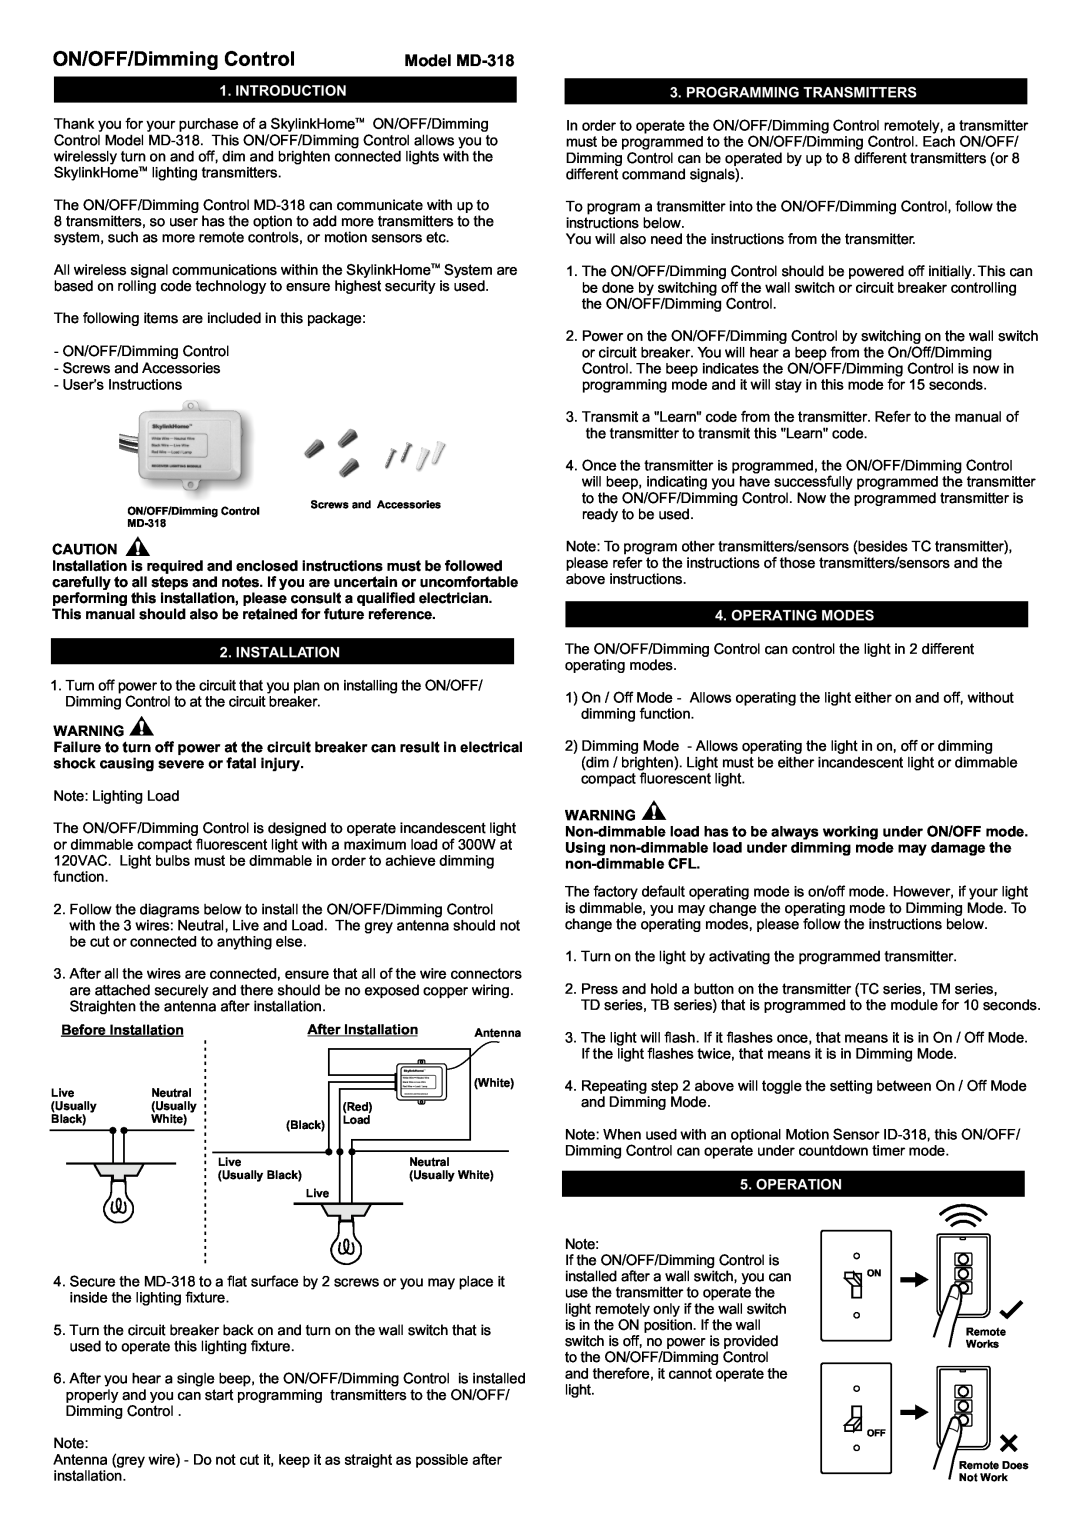 SkyLink manual Introduction, Installation, Programming Transmitters, Operating Modes, Operation, Model MD-318 